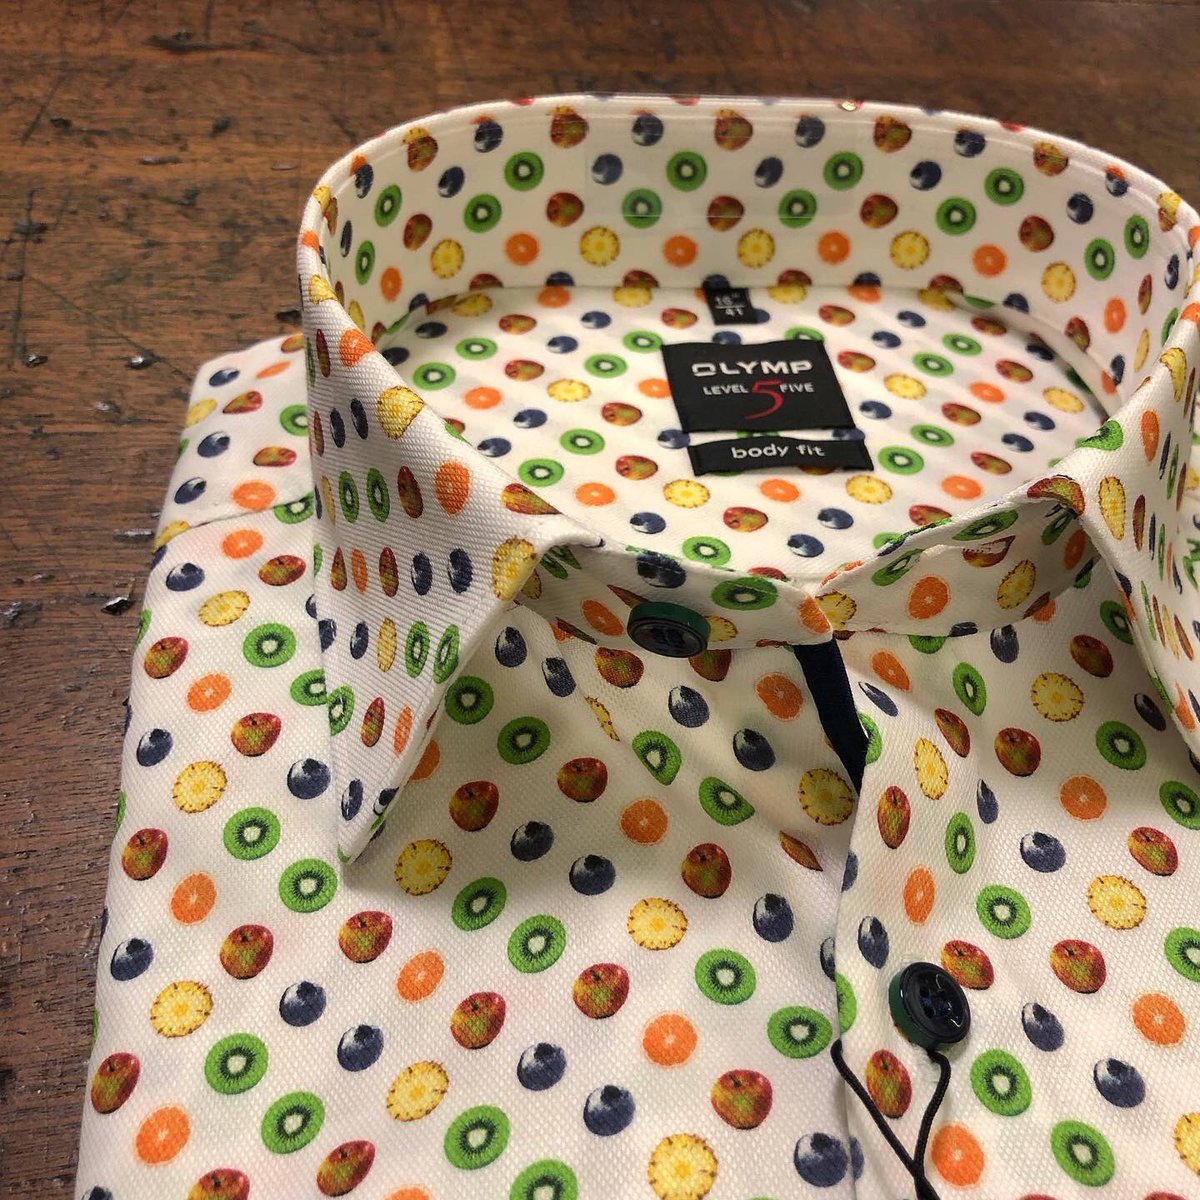 A fruity little number from #olymp shirts 🍏🍎🥝
#wjbennett #menswear #mensweardaily #mensfashion #menstyle #dapper #springfashion #summerstyles #olymp #shirt #shopping #shoplocal #supportsmallbusiness #rye #ryeeastsussex #sussex #kent